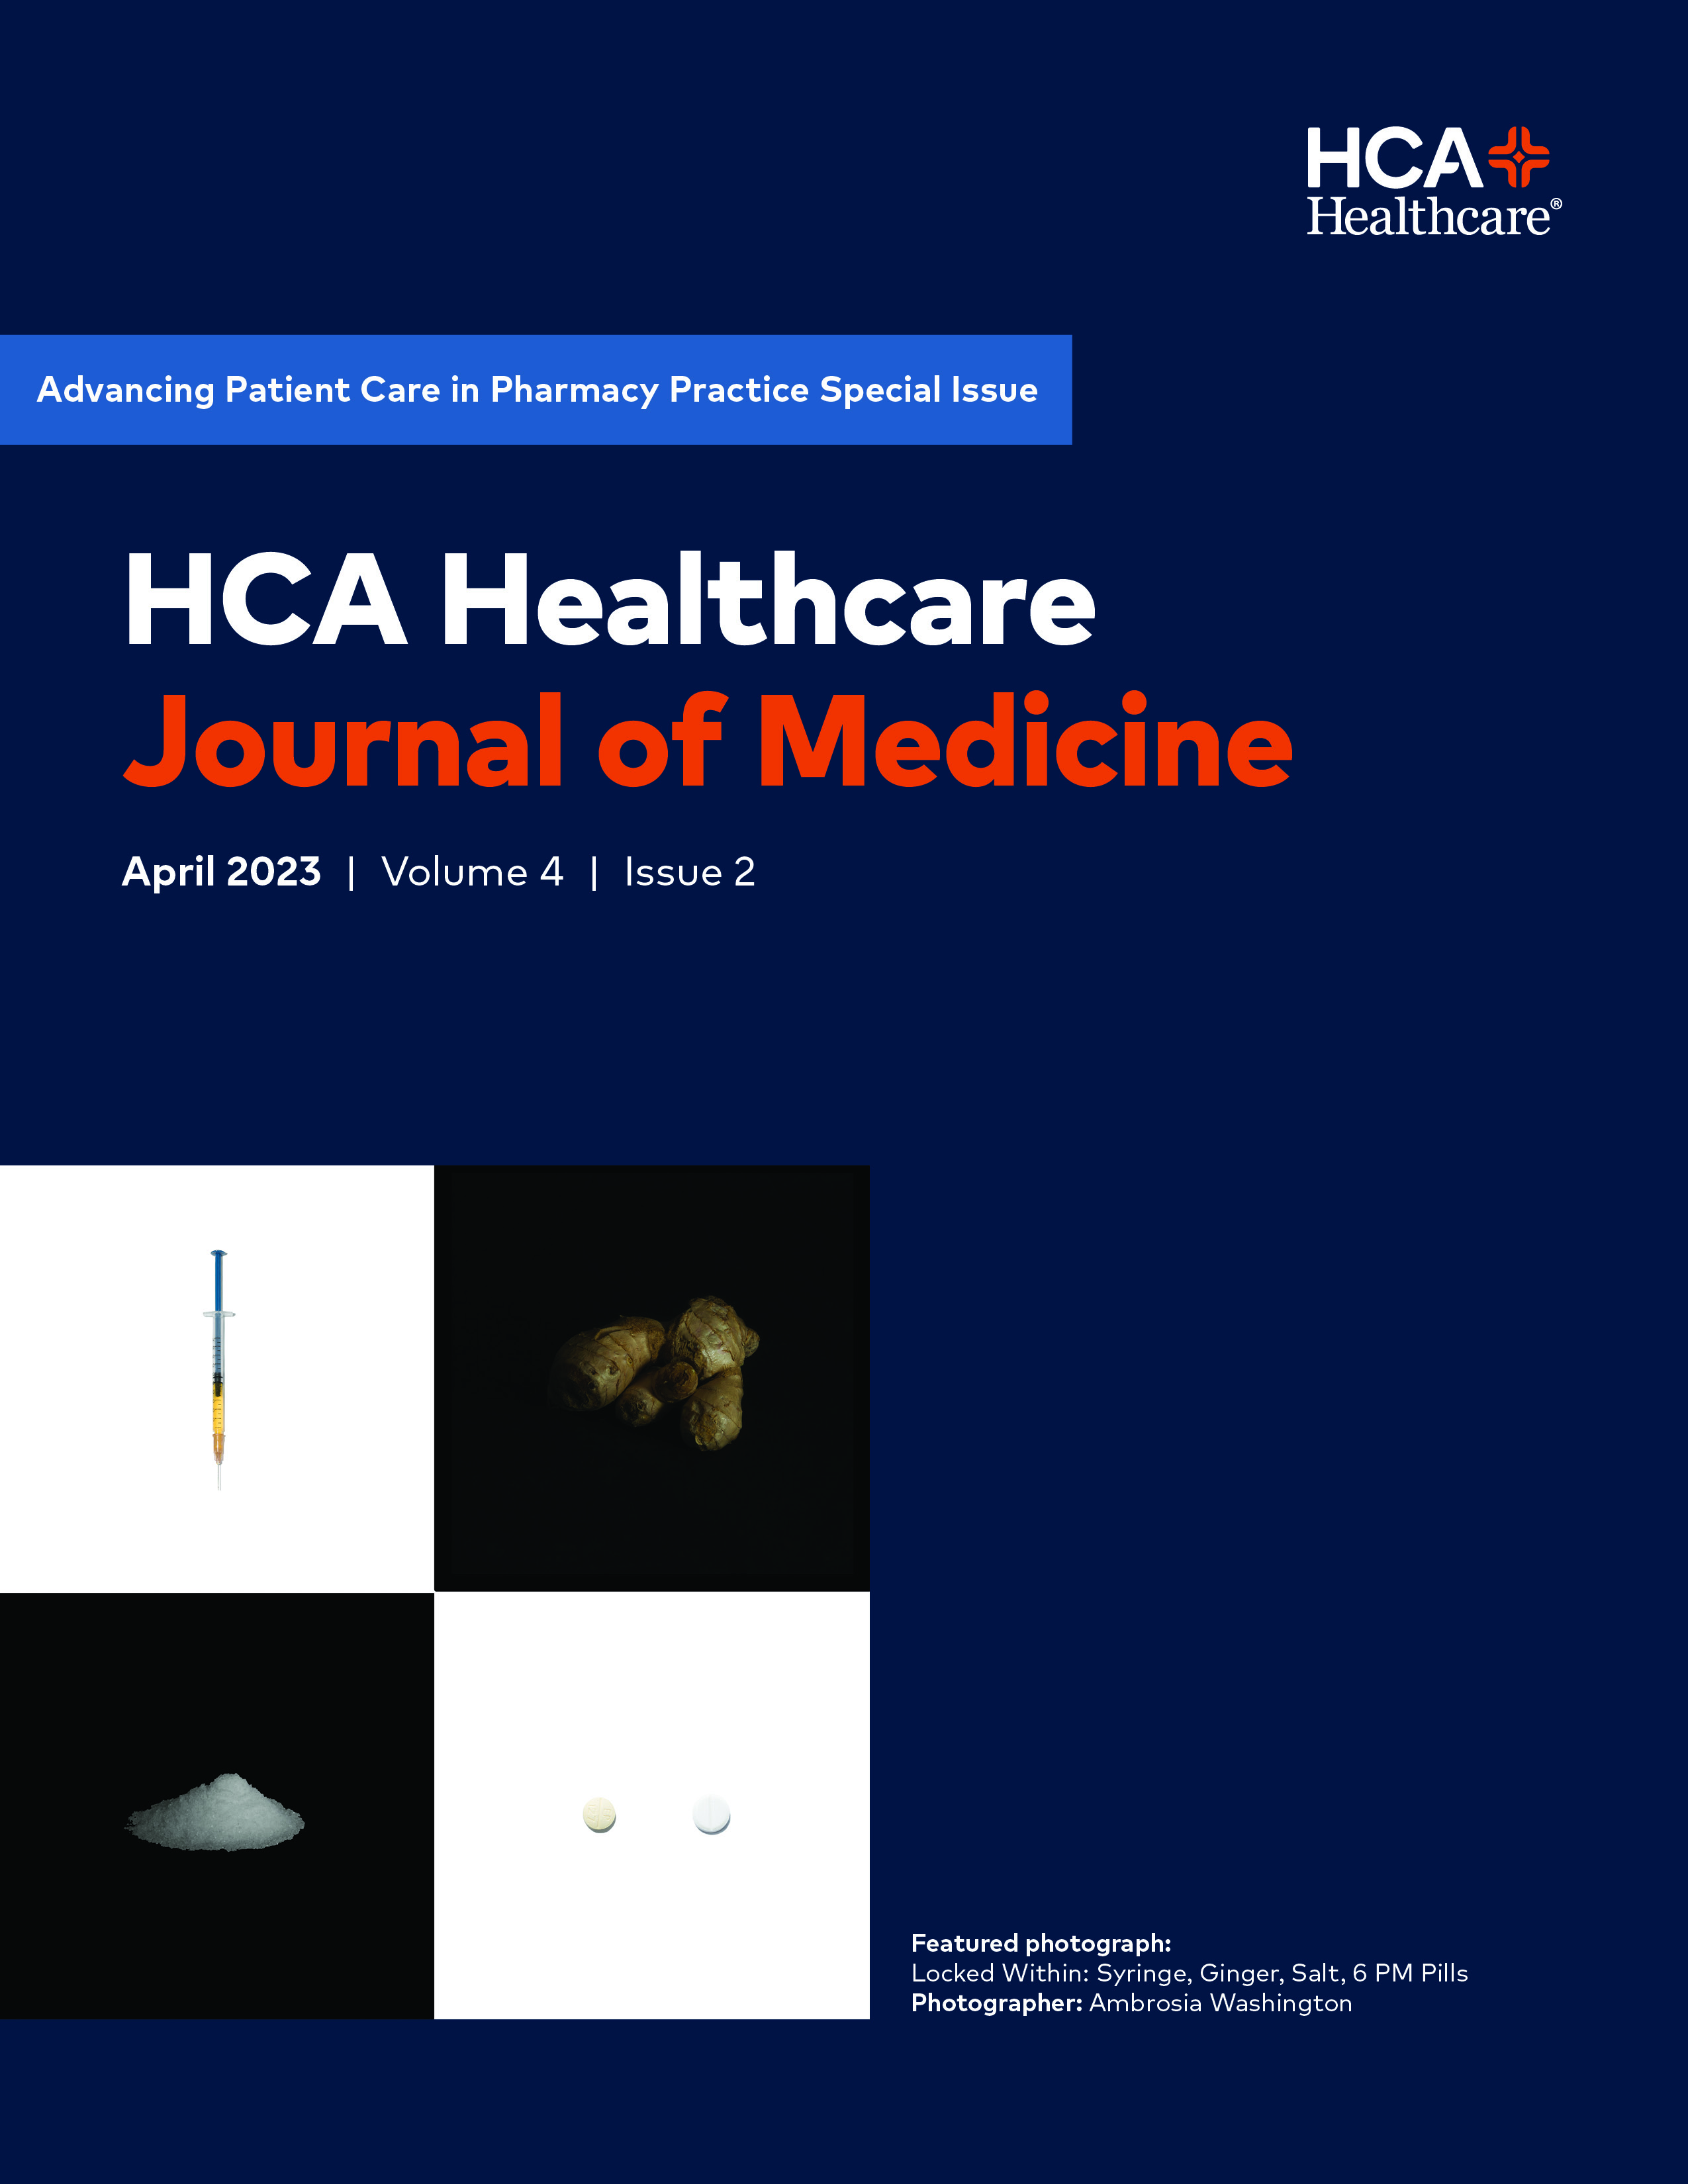 HCA Healthcare Journal of Medicine, Vol 4, Iss 2 Cover